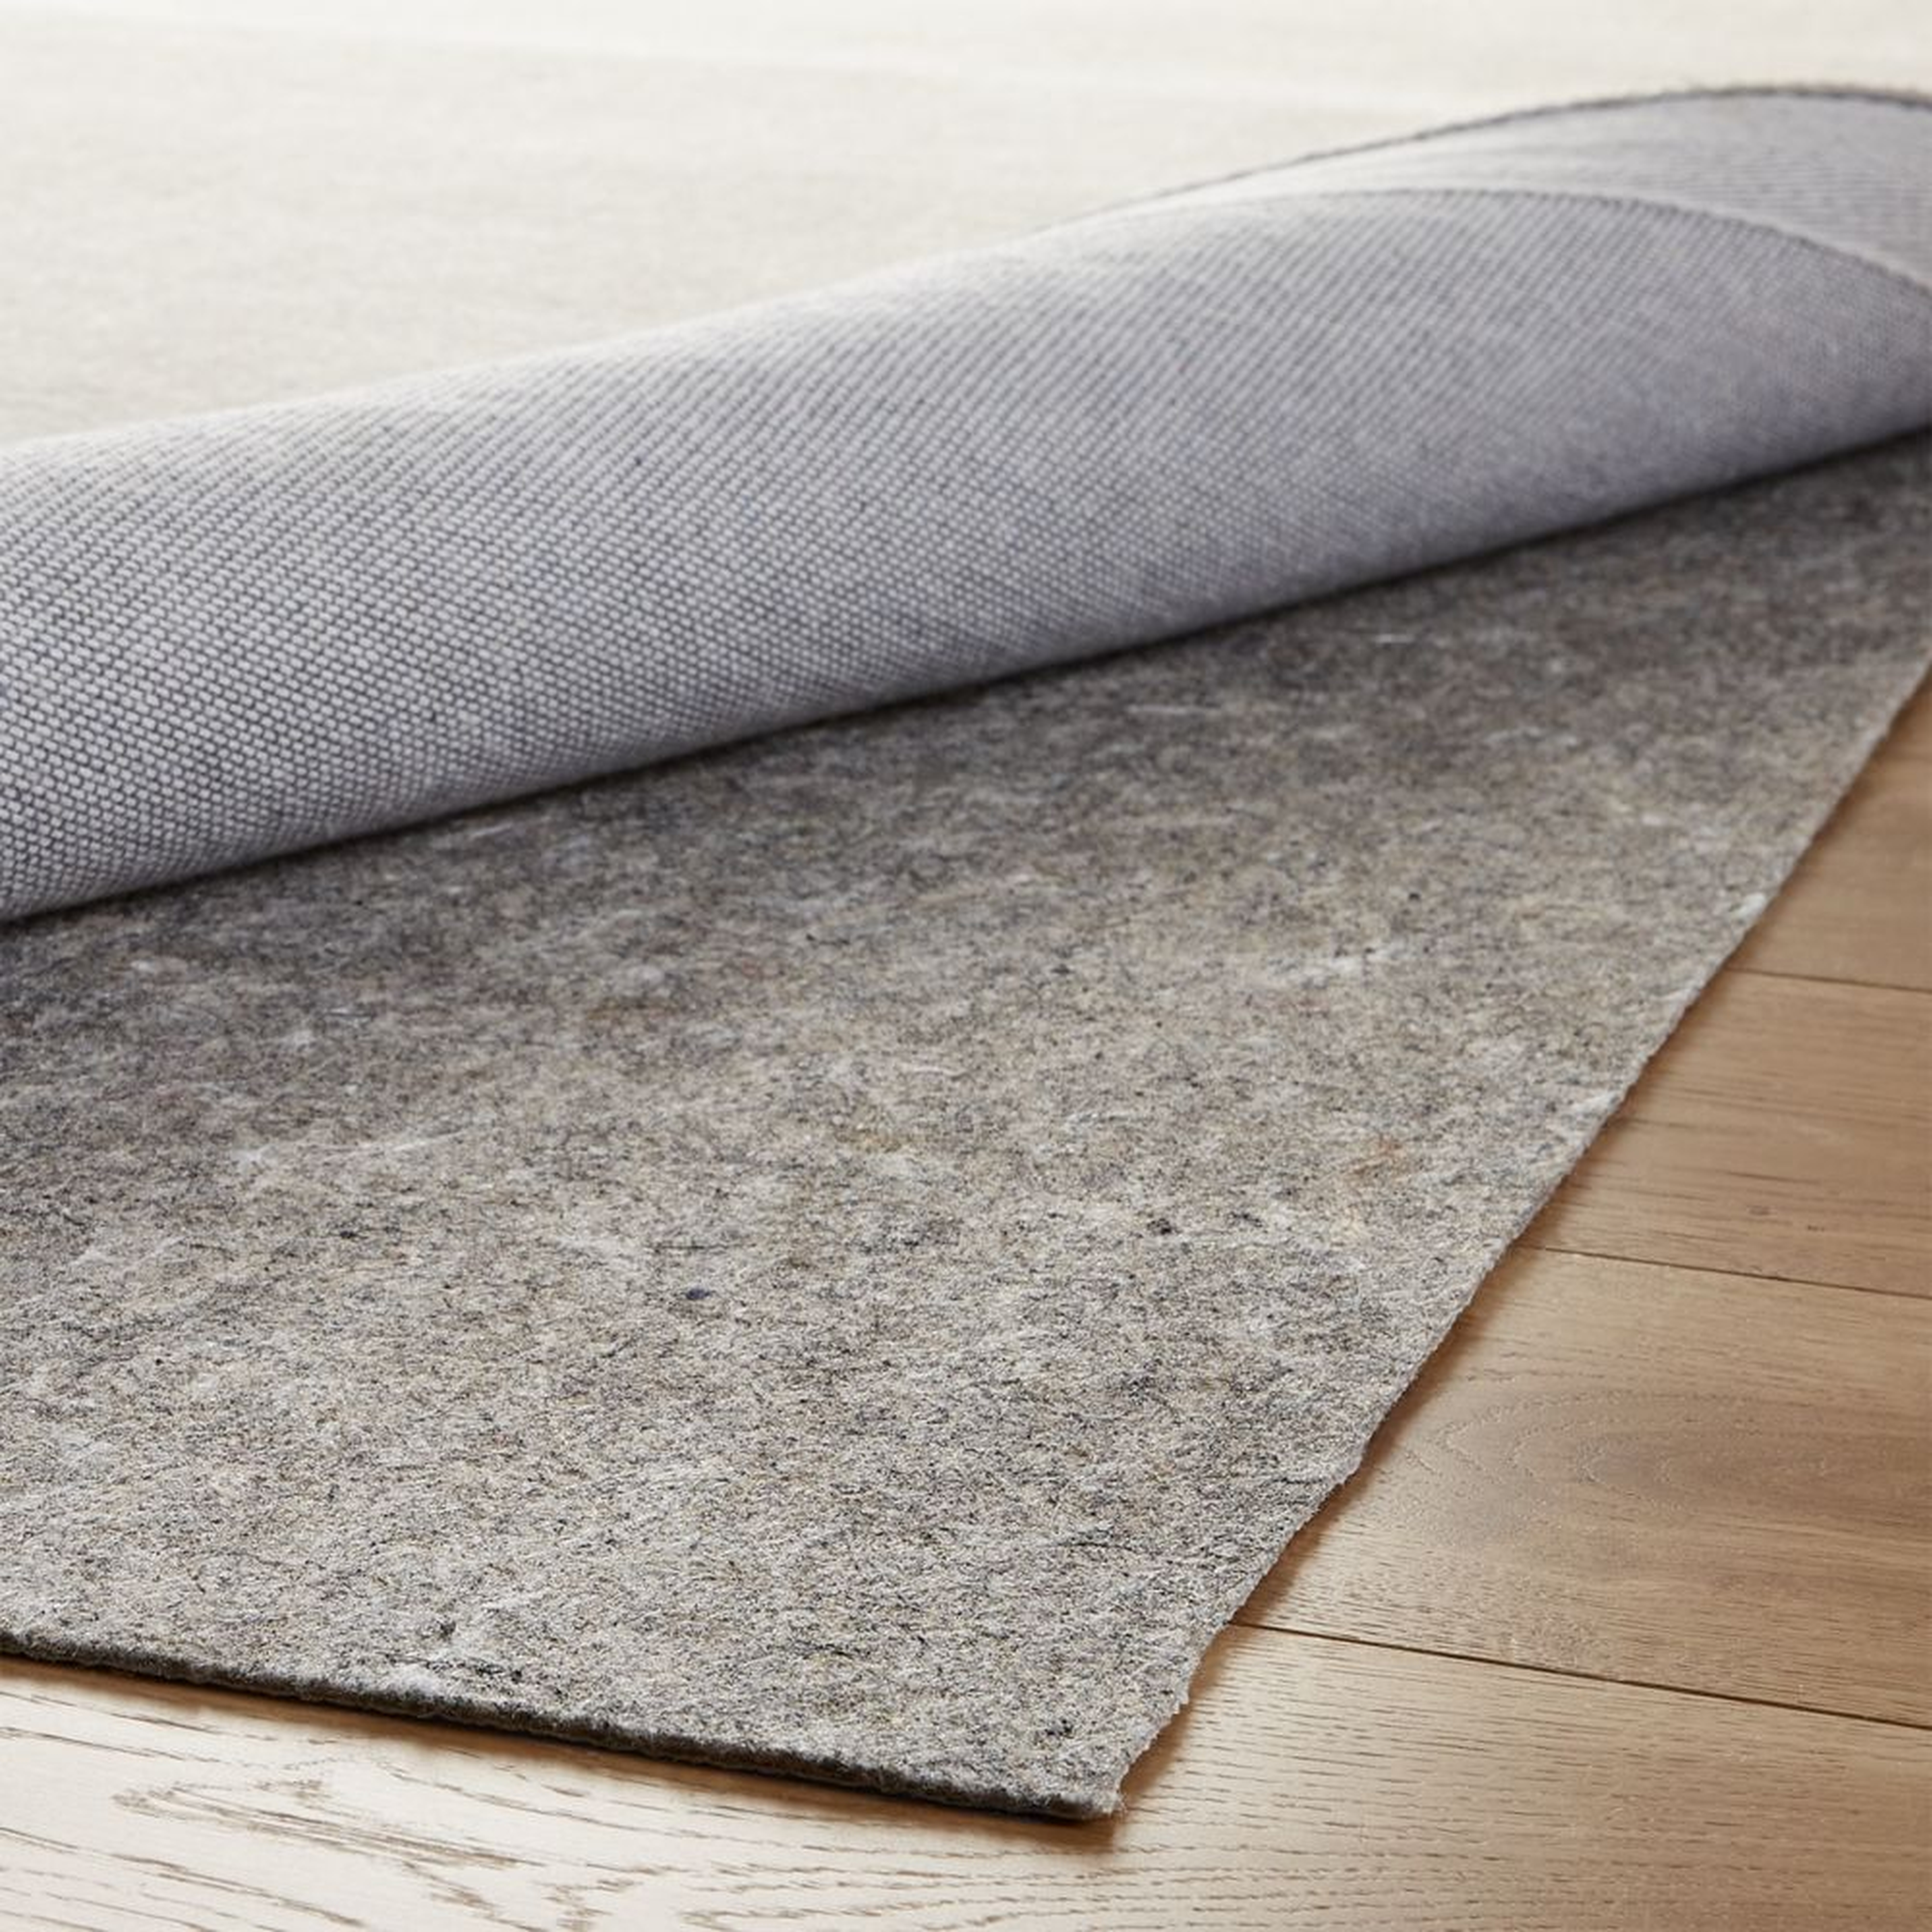 Multisurface 9'x12' Thin Rug Pad - Crate and Barrel